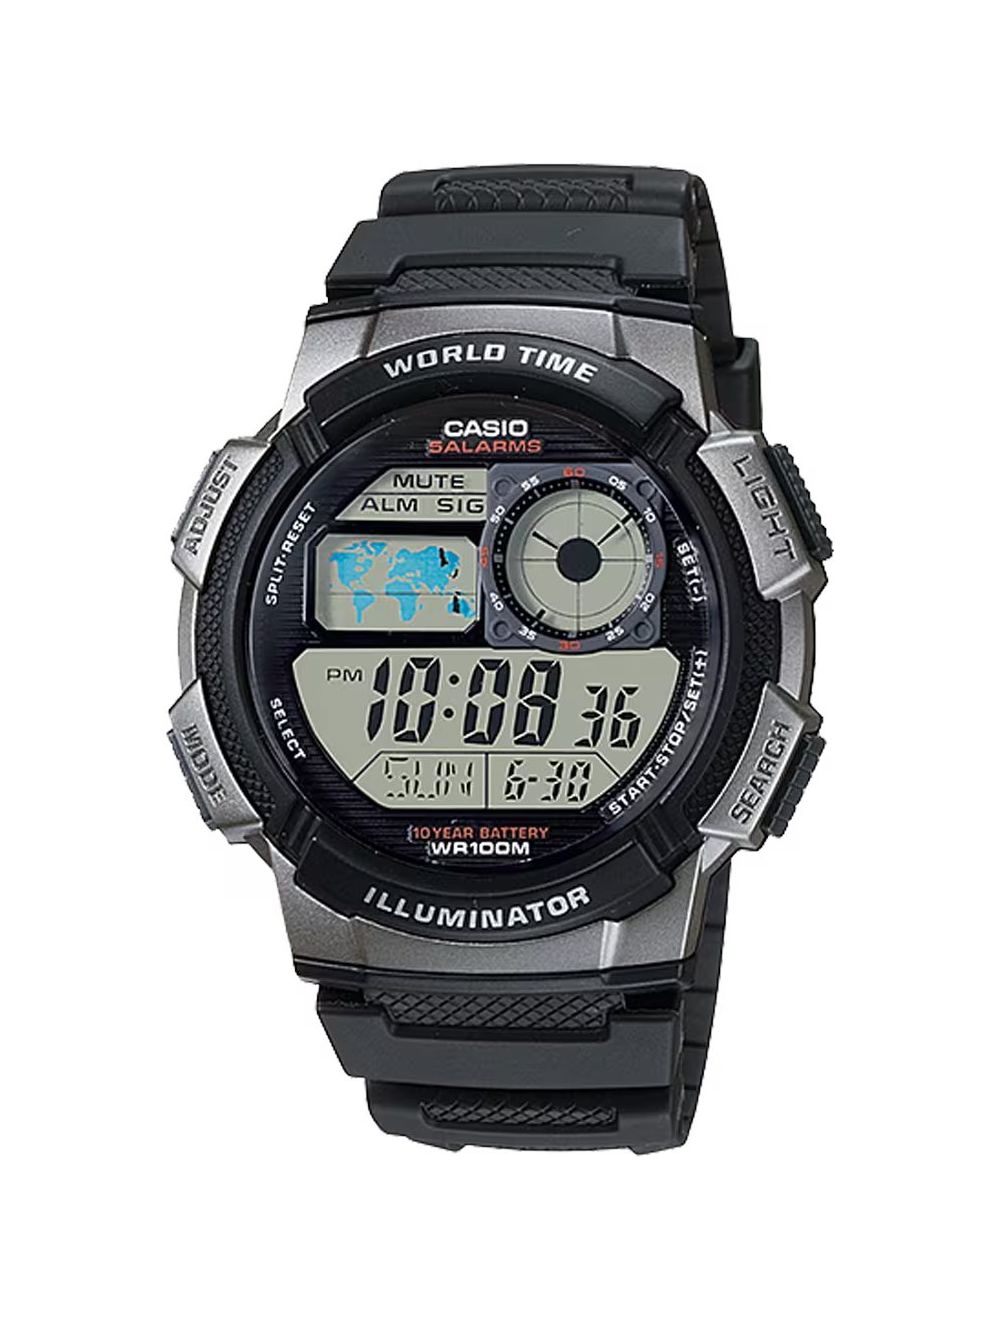 Casio Classic World Time Digital Watch with 100 Meter Water-Resistance - Newest Products